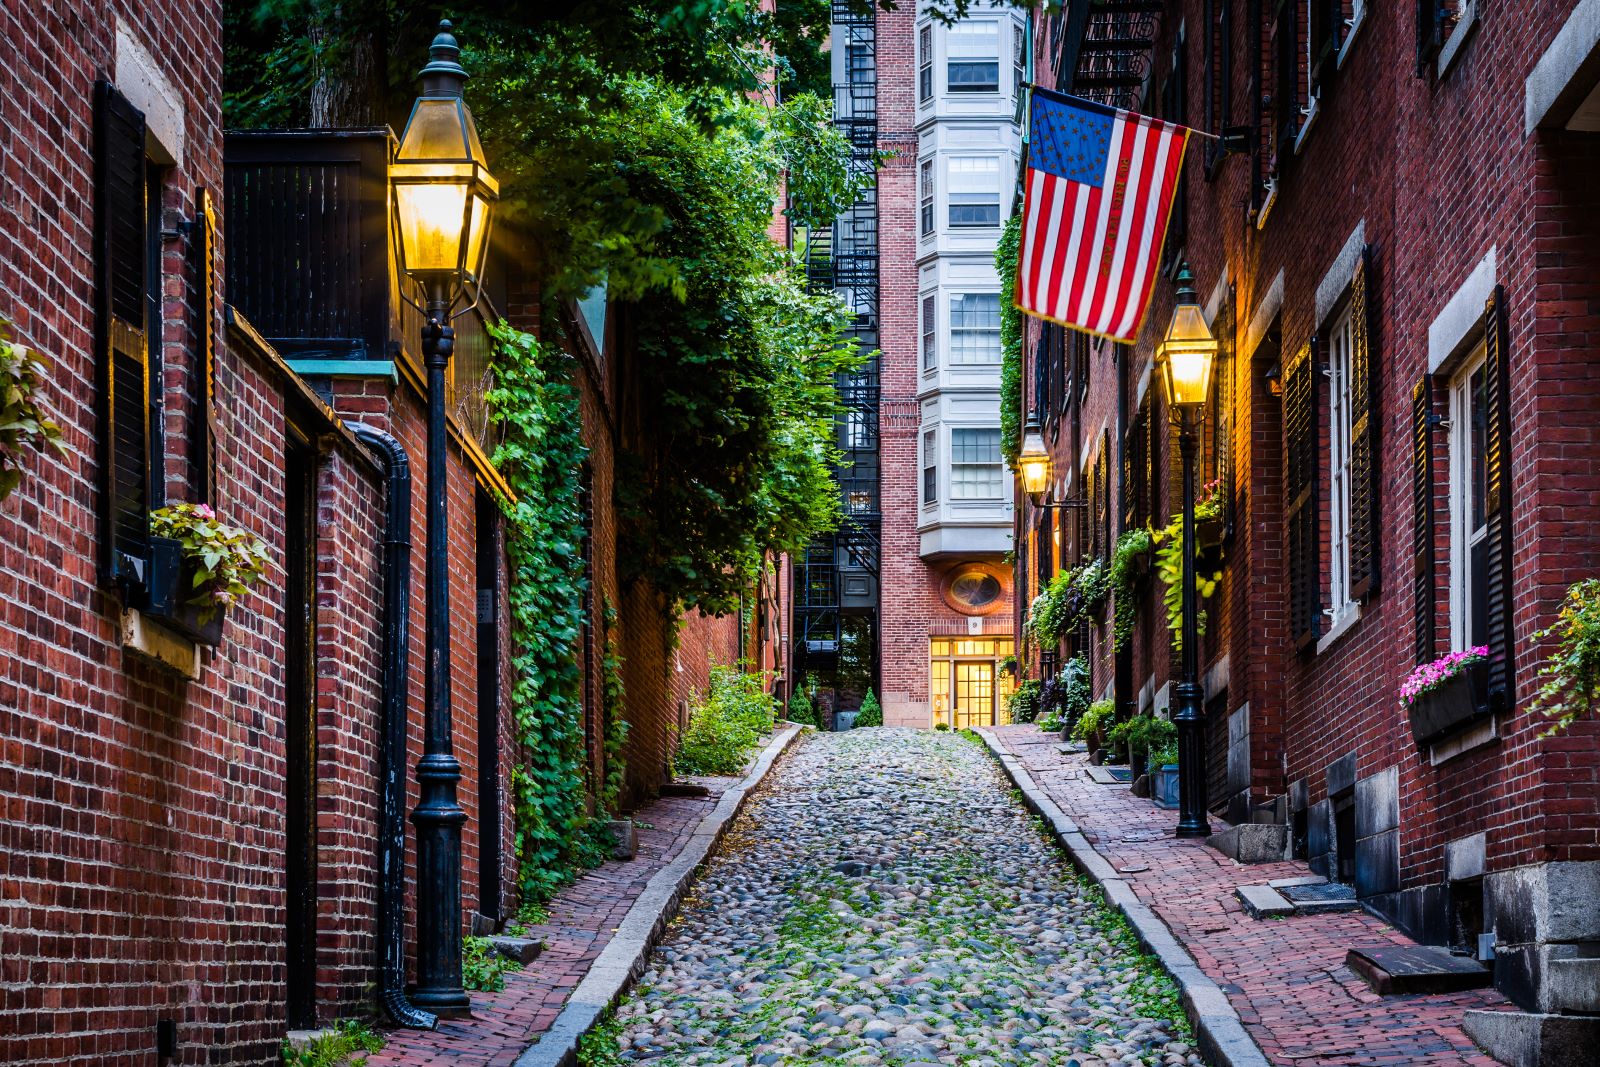 <p class="wp-caption-text">Image Credit: Shutterstock / Jon Bilous</p>  <p>Take a walk through Beacon Hill, with its charming gas-lit streets and brick sidewalks. This neighborhood looks much like it did in the 1800s.</p>